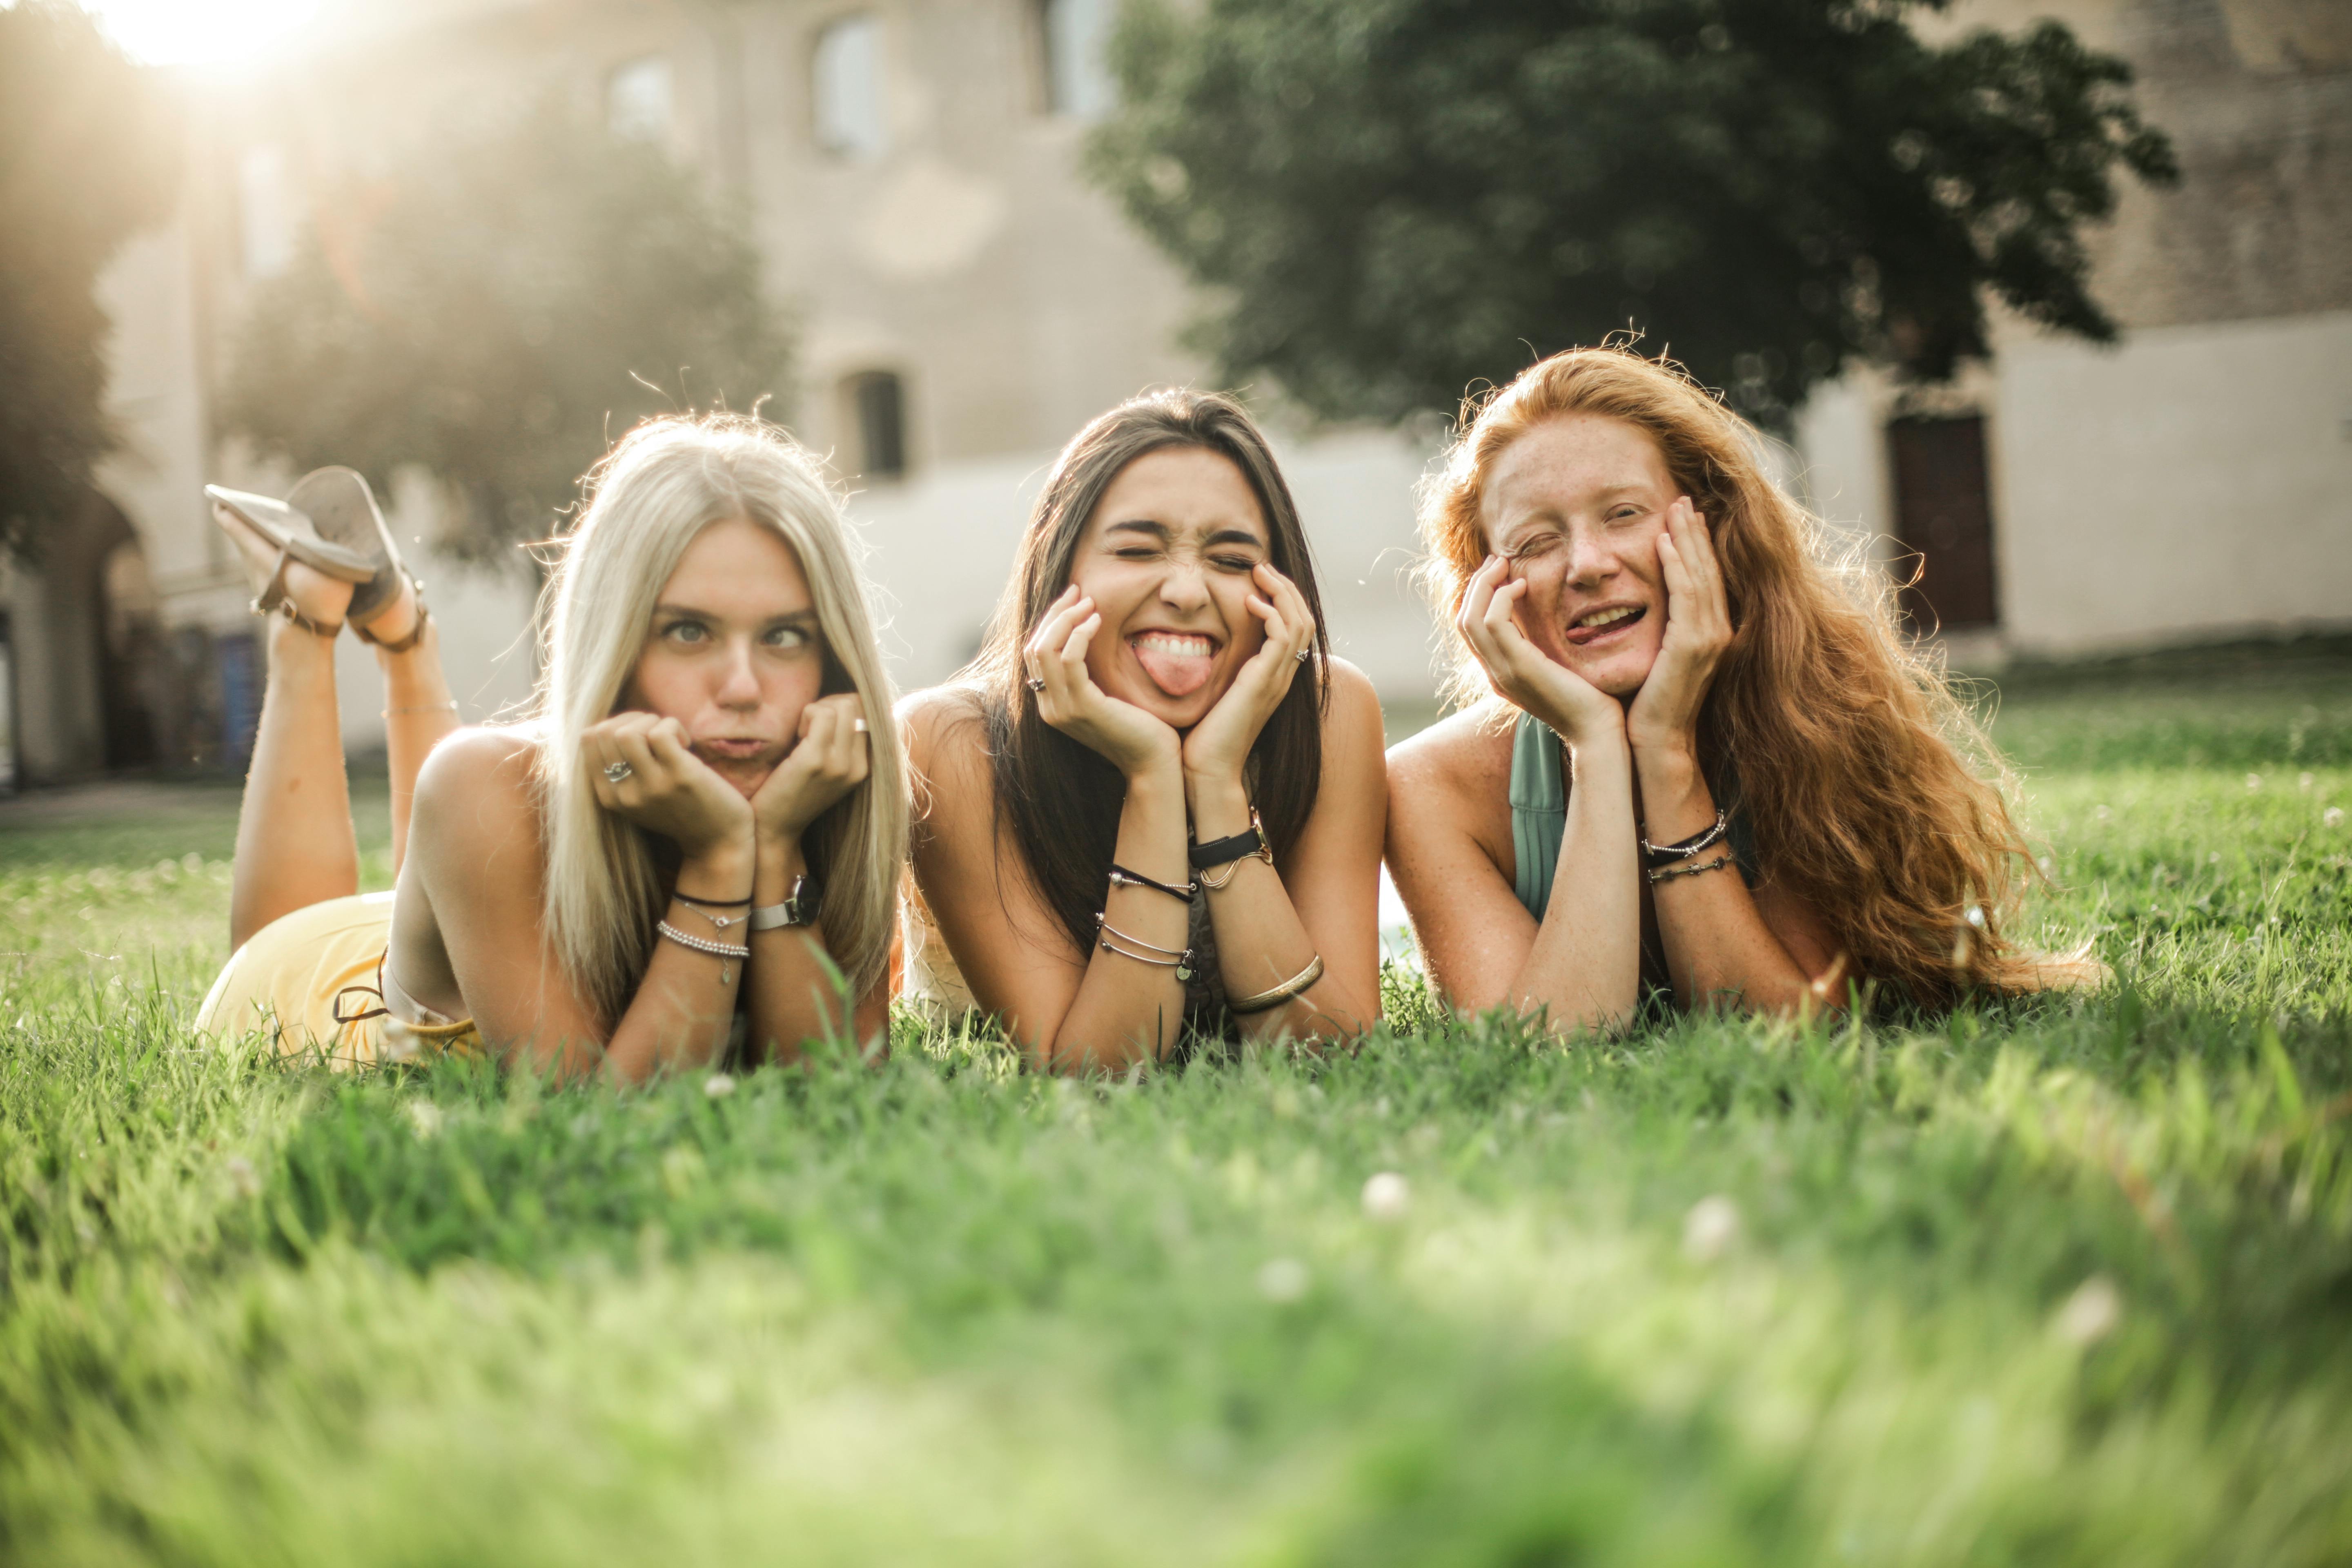 Group Friends Doing Funny Poses While Stock Photo 1320591347 | Shutterstock